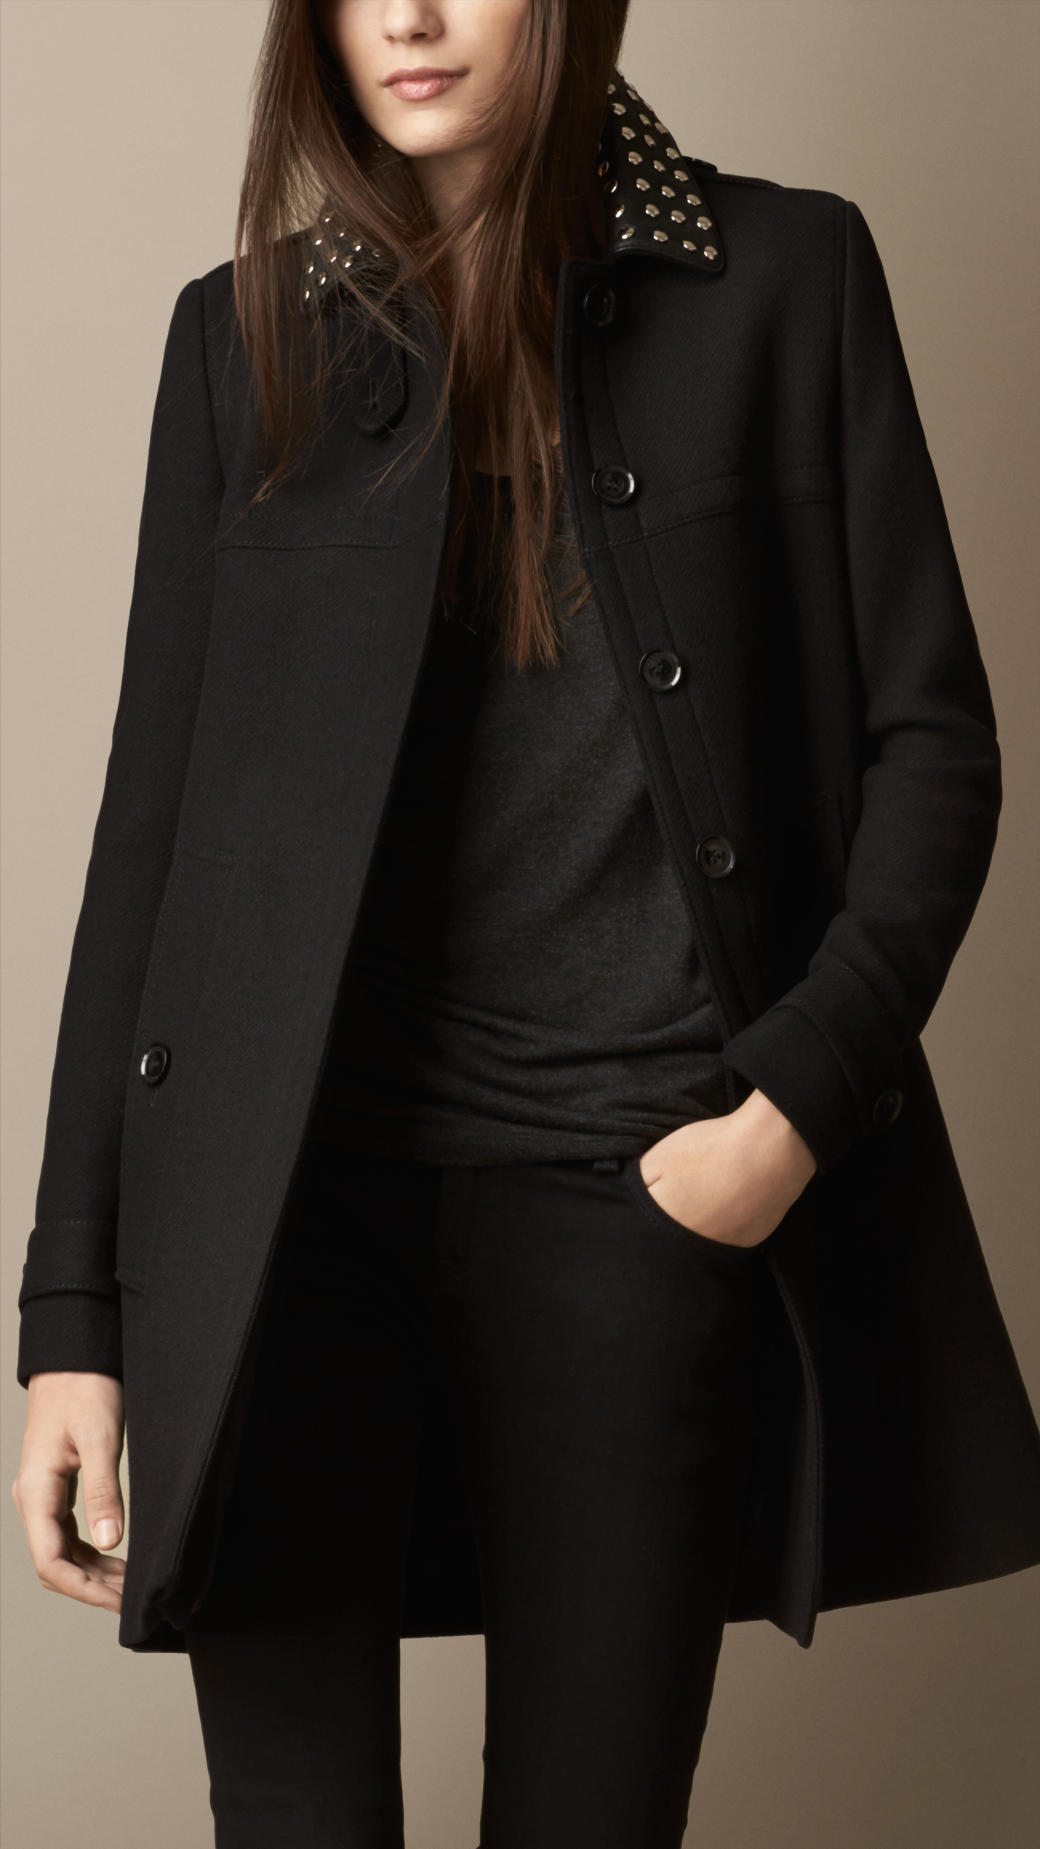 Lyst - Burberry Studded Leather Collar A-line Coat in Black